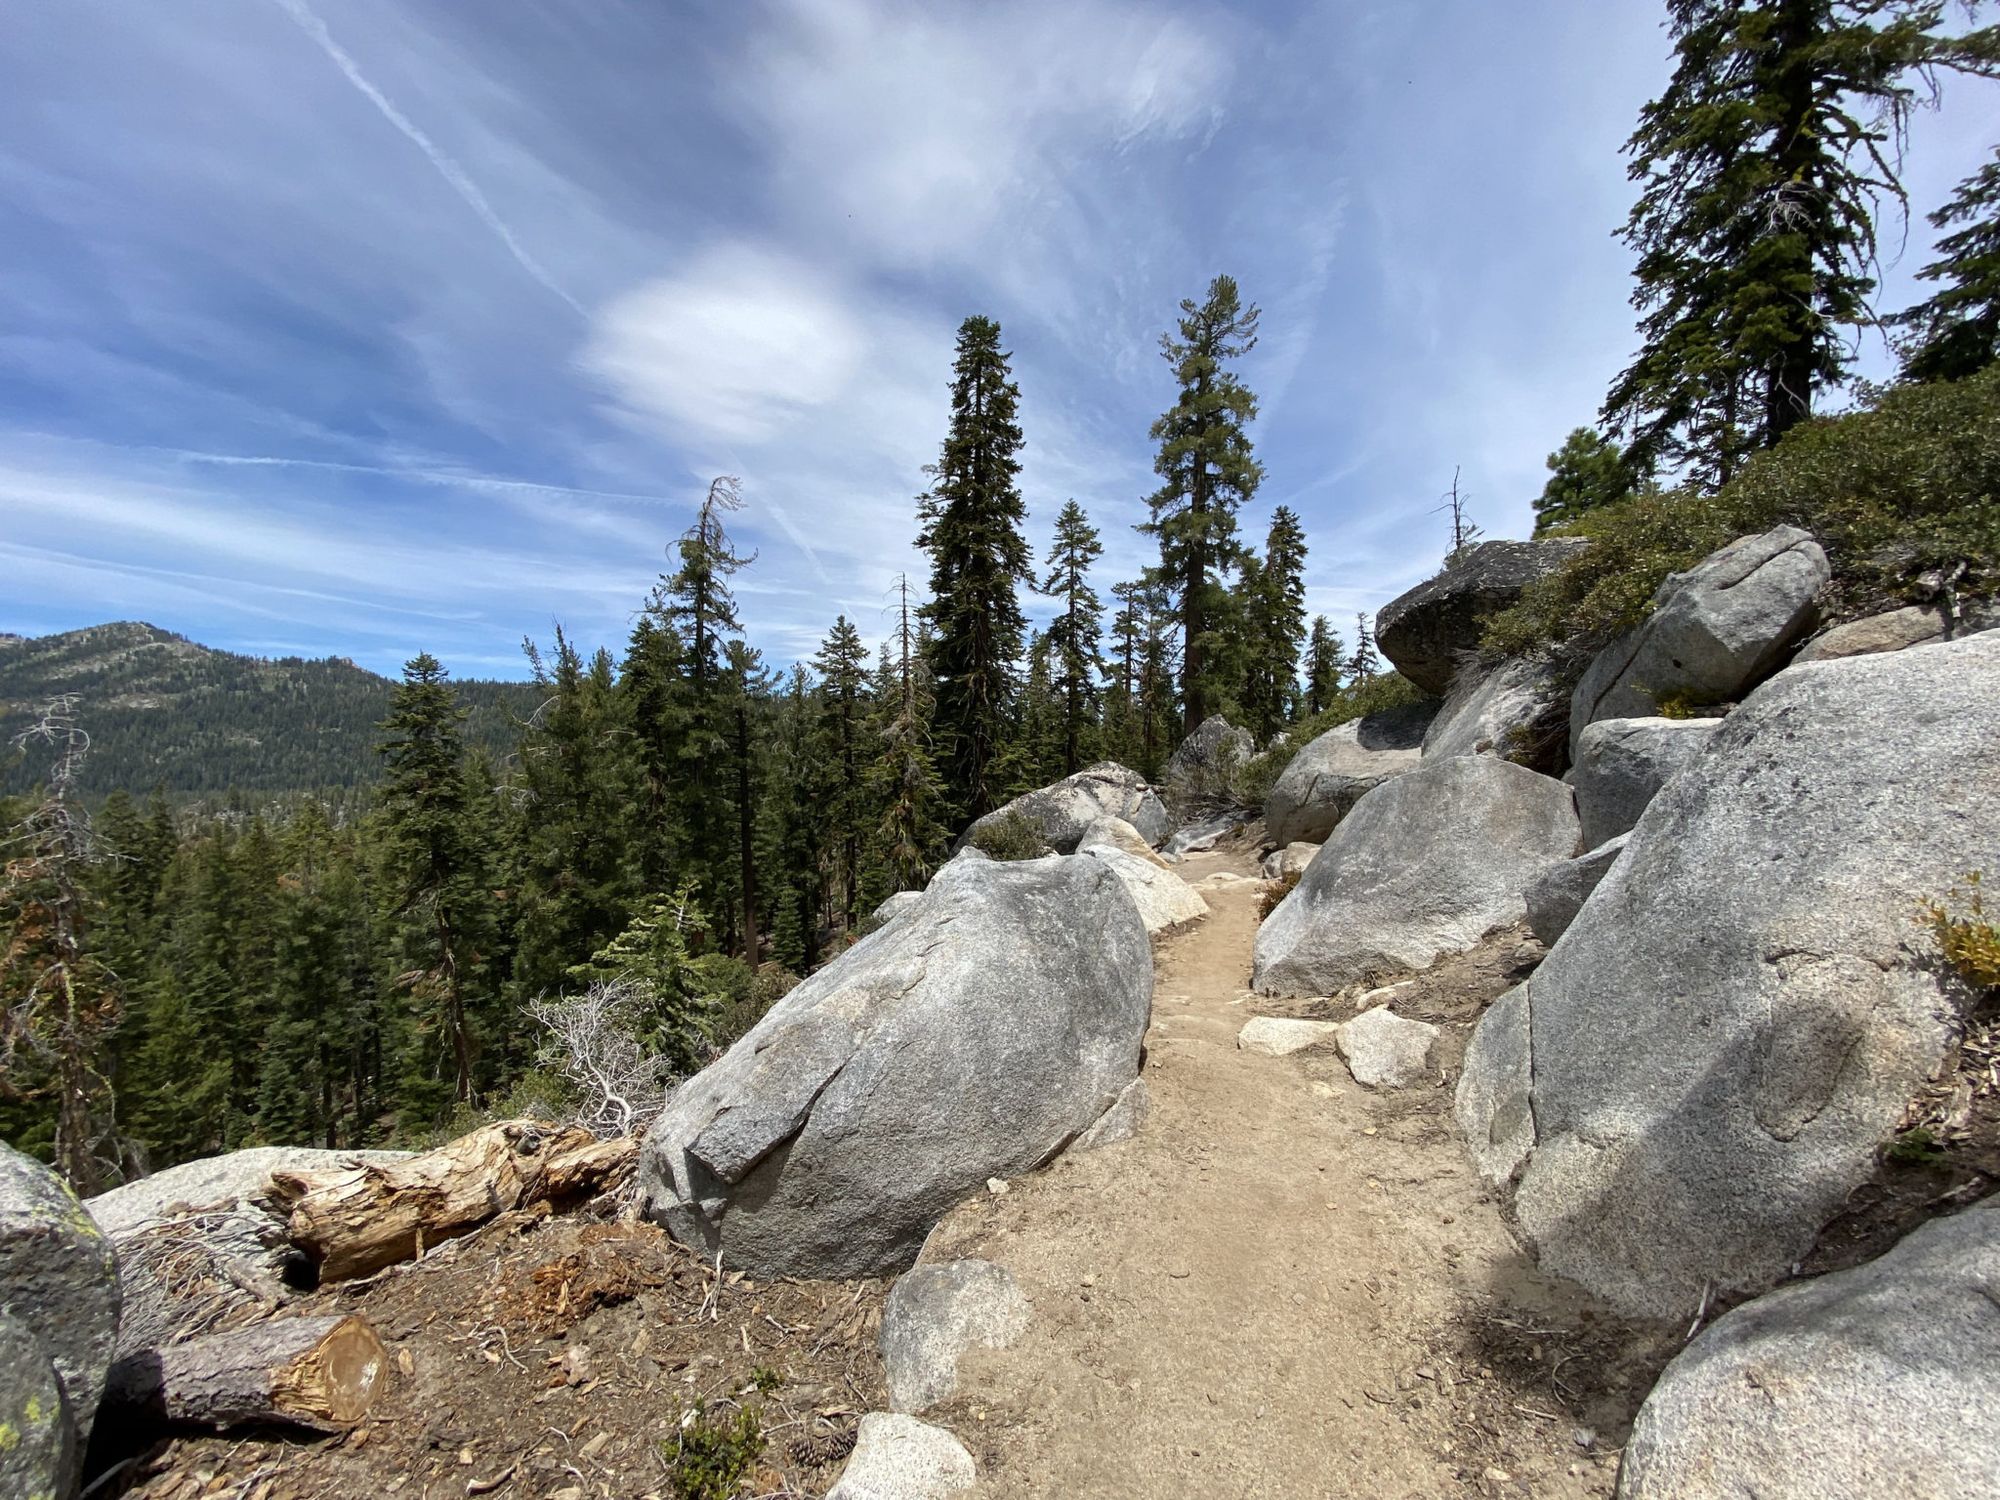 A trail passing through large boulders